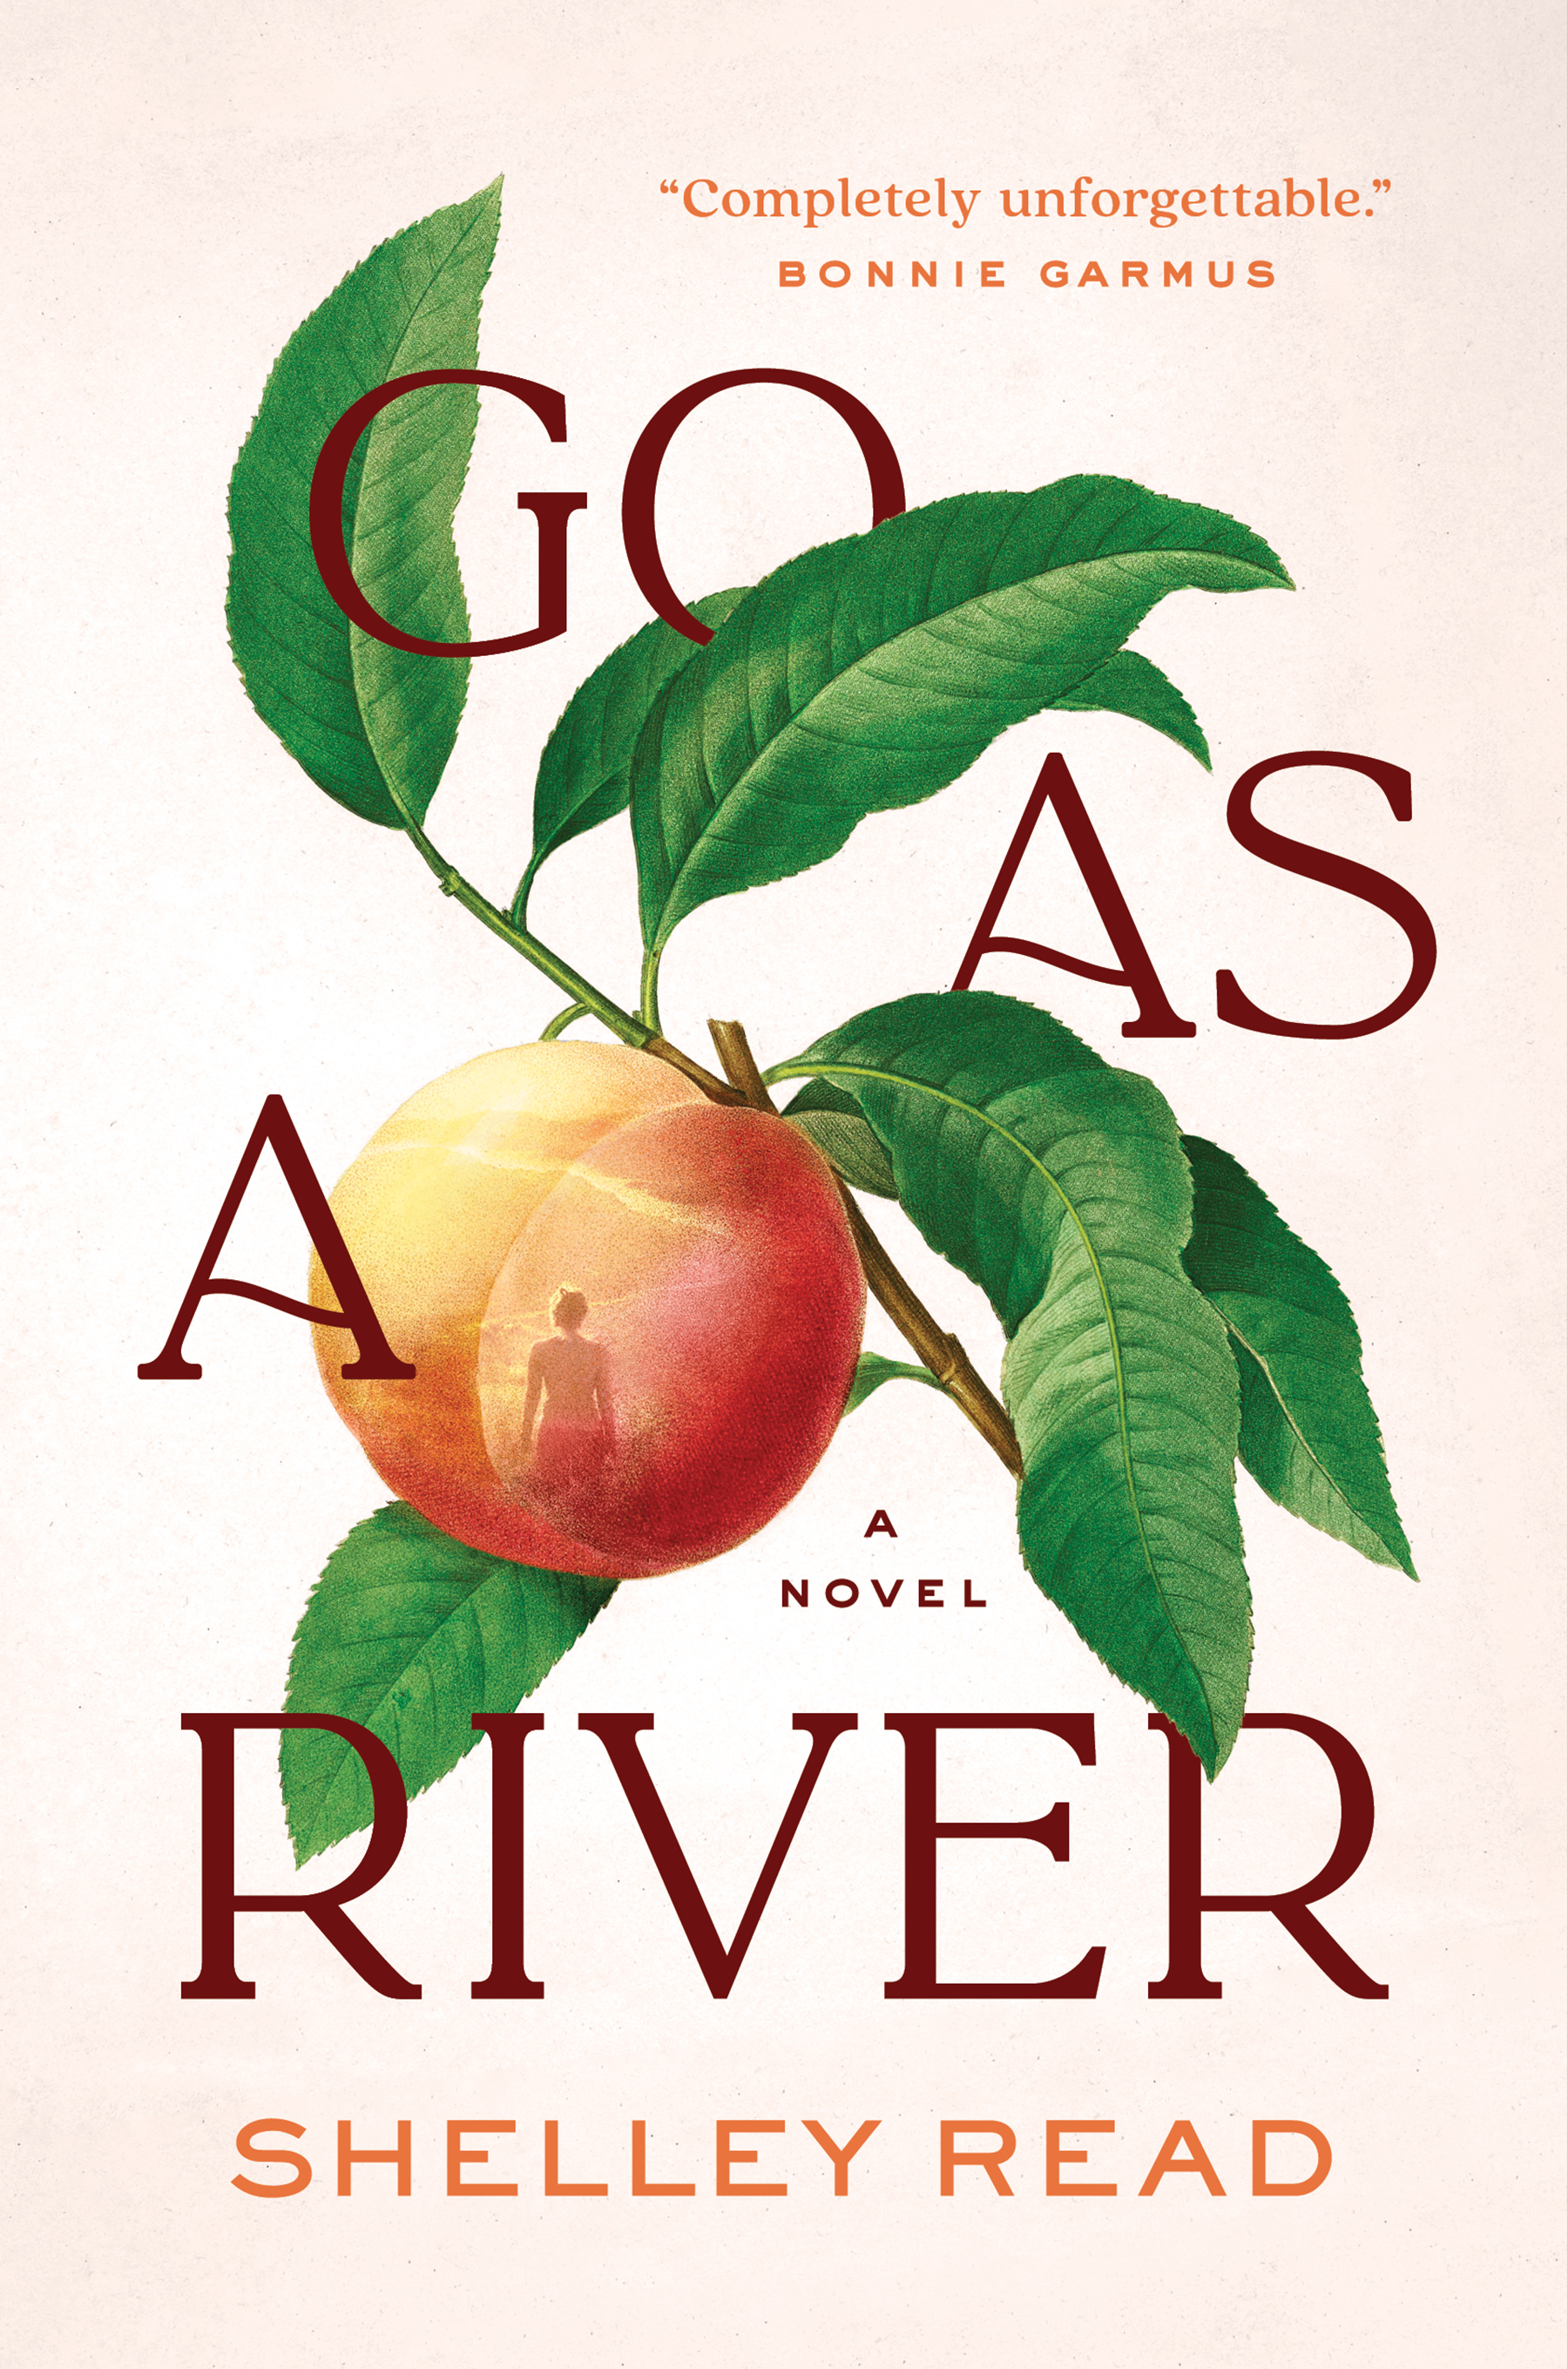 Shelley Read to Participate in the Kentucky Book Festival with “Go As A River”